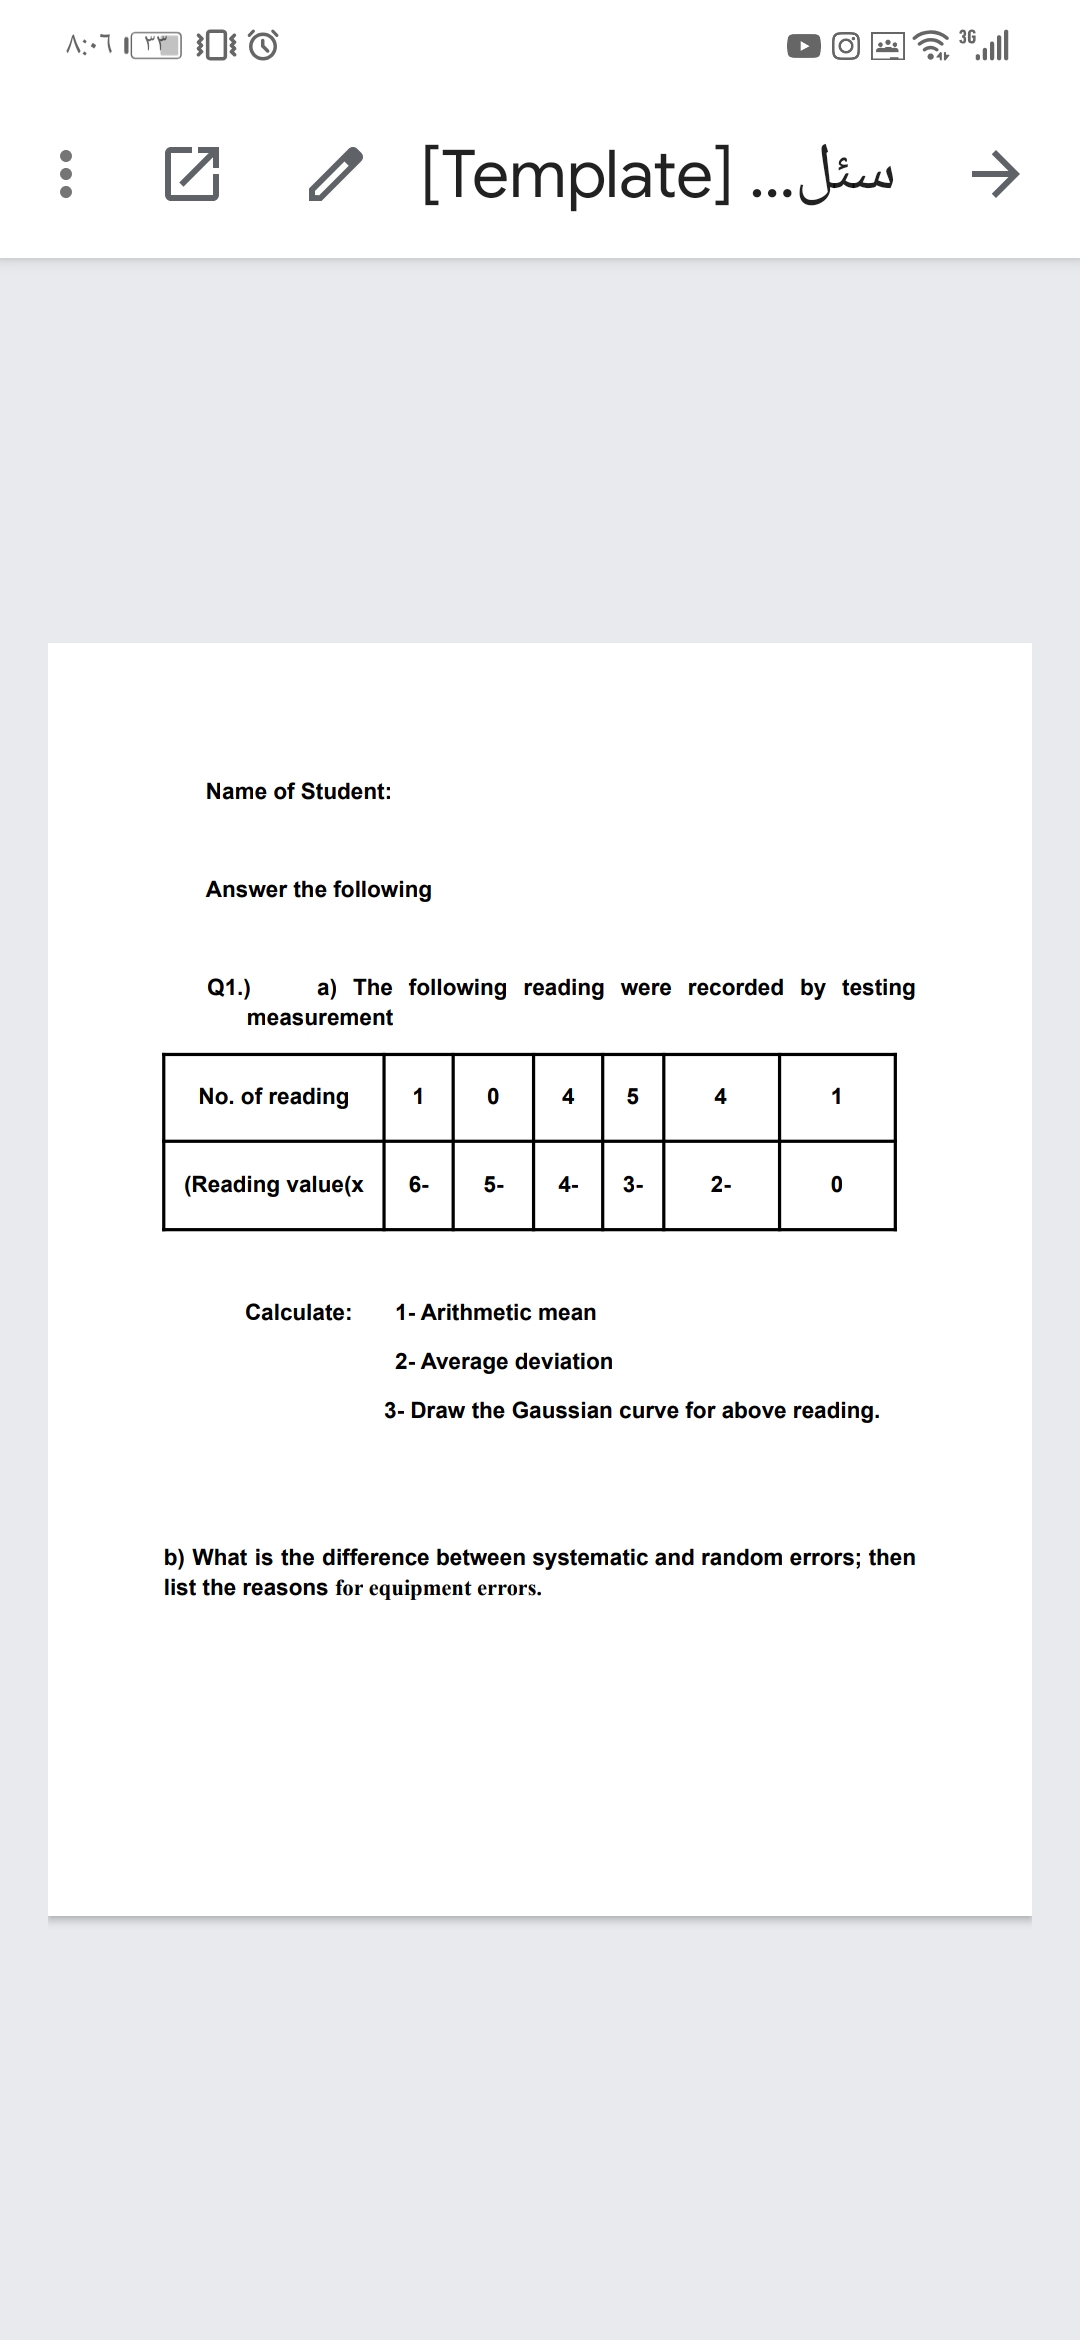 36 ull
[Template].. Jus →
Name of Student:
Answer the following
Q1.)
a) The following reading were recorded by testing
measurement
No. of reading
1
4
4
(Reading value(x
6-
5-
4-
3-
Calculate:
1- Arithmetic mean
2- Average deviation
3- Draw the Gaussian curve for above reading.
b) What is the difference between systematic and random errors; then
list the reasons for equipment errors.
2-
LO
